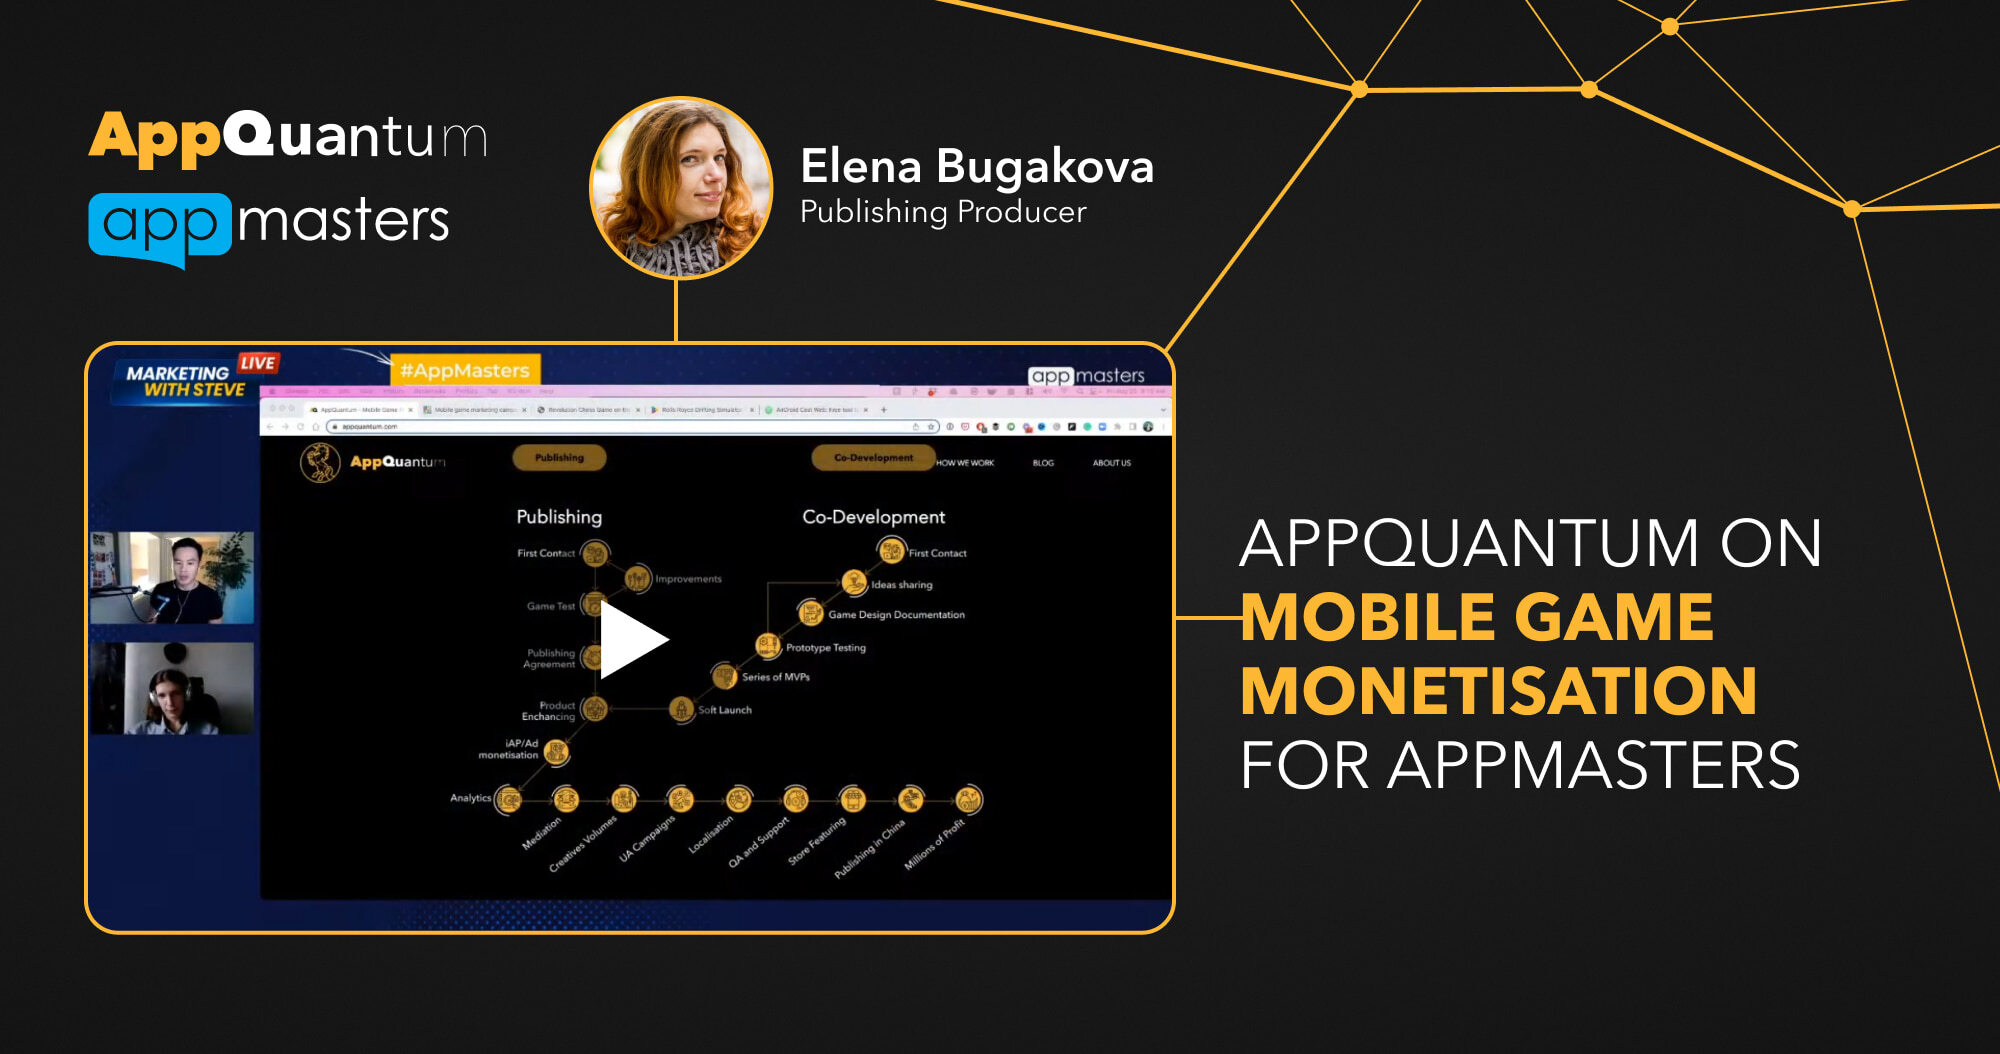 AppQuantum on Mobile Game Monetisation for AppMasters